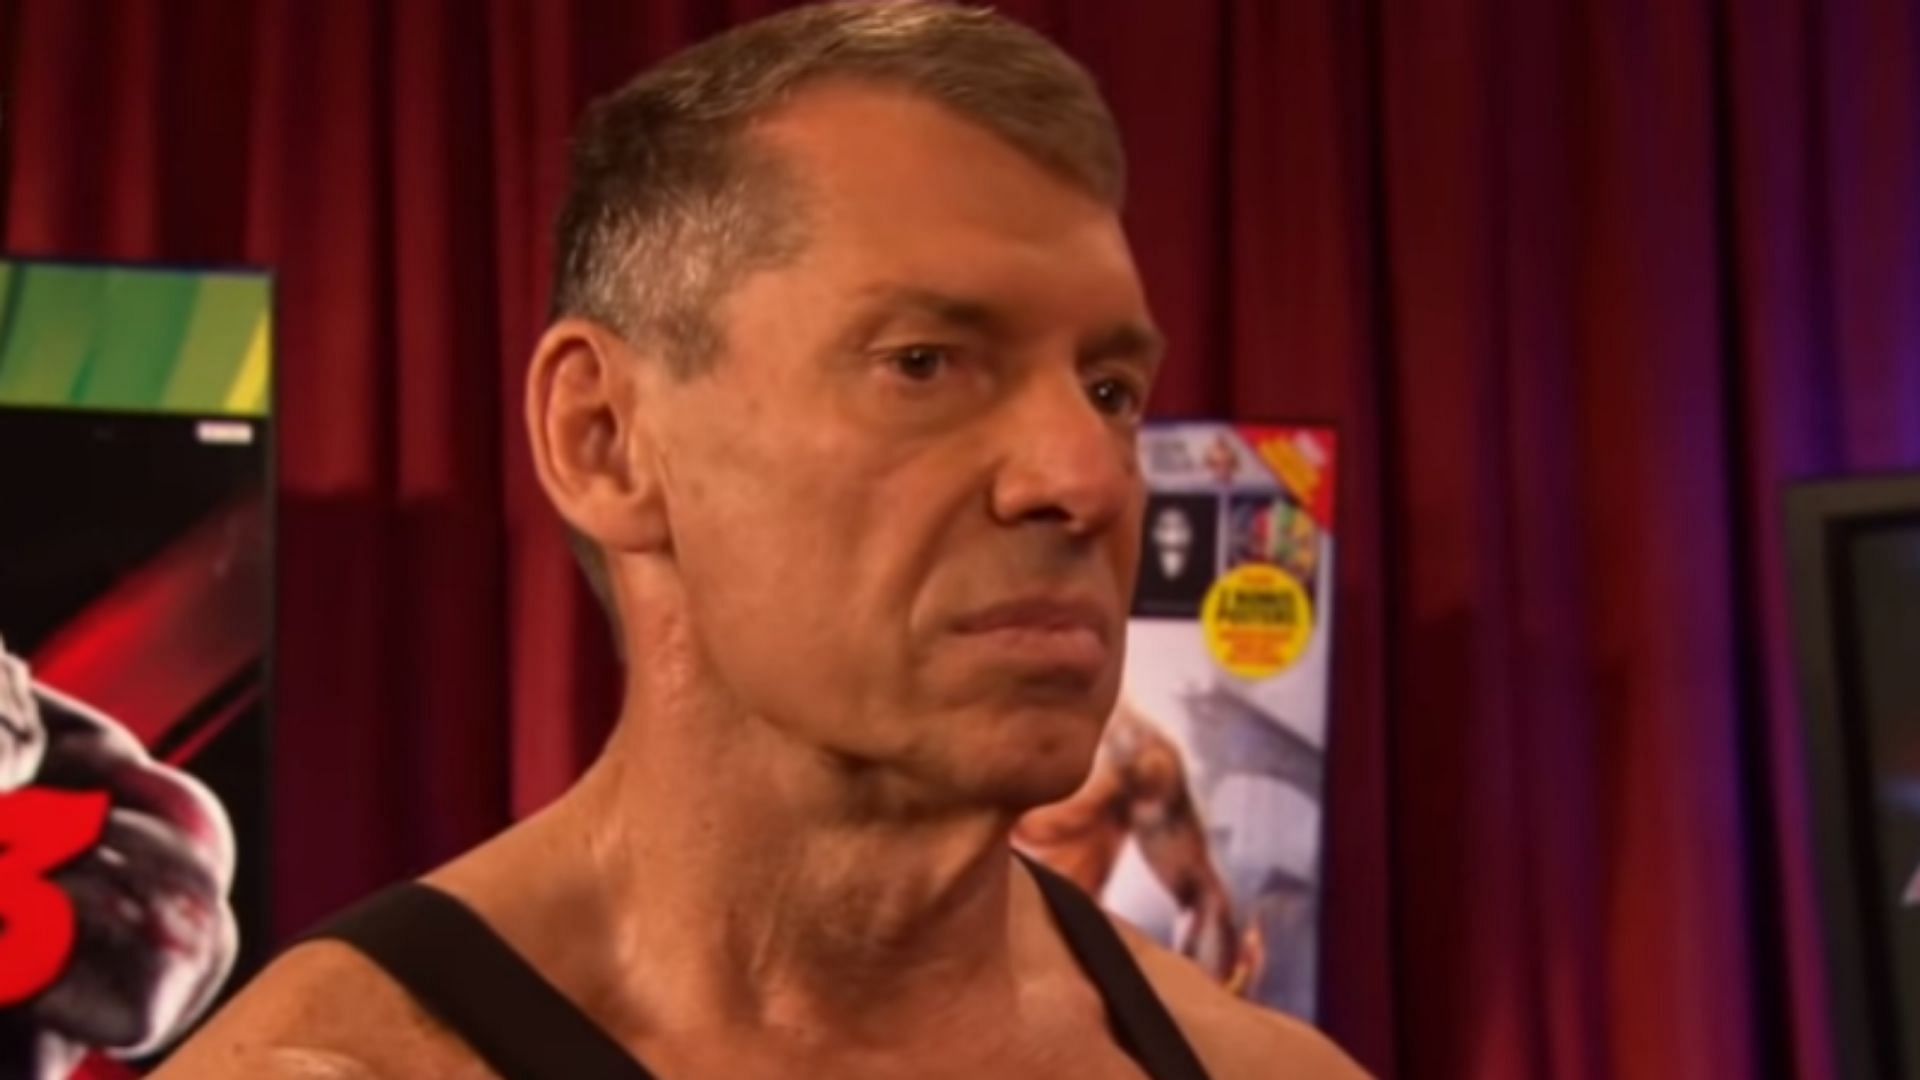 Vince McMahon often gives superstars feedback immediately after matches